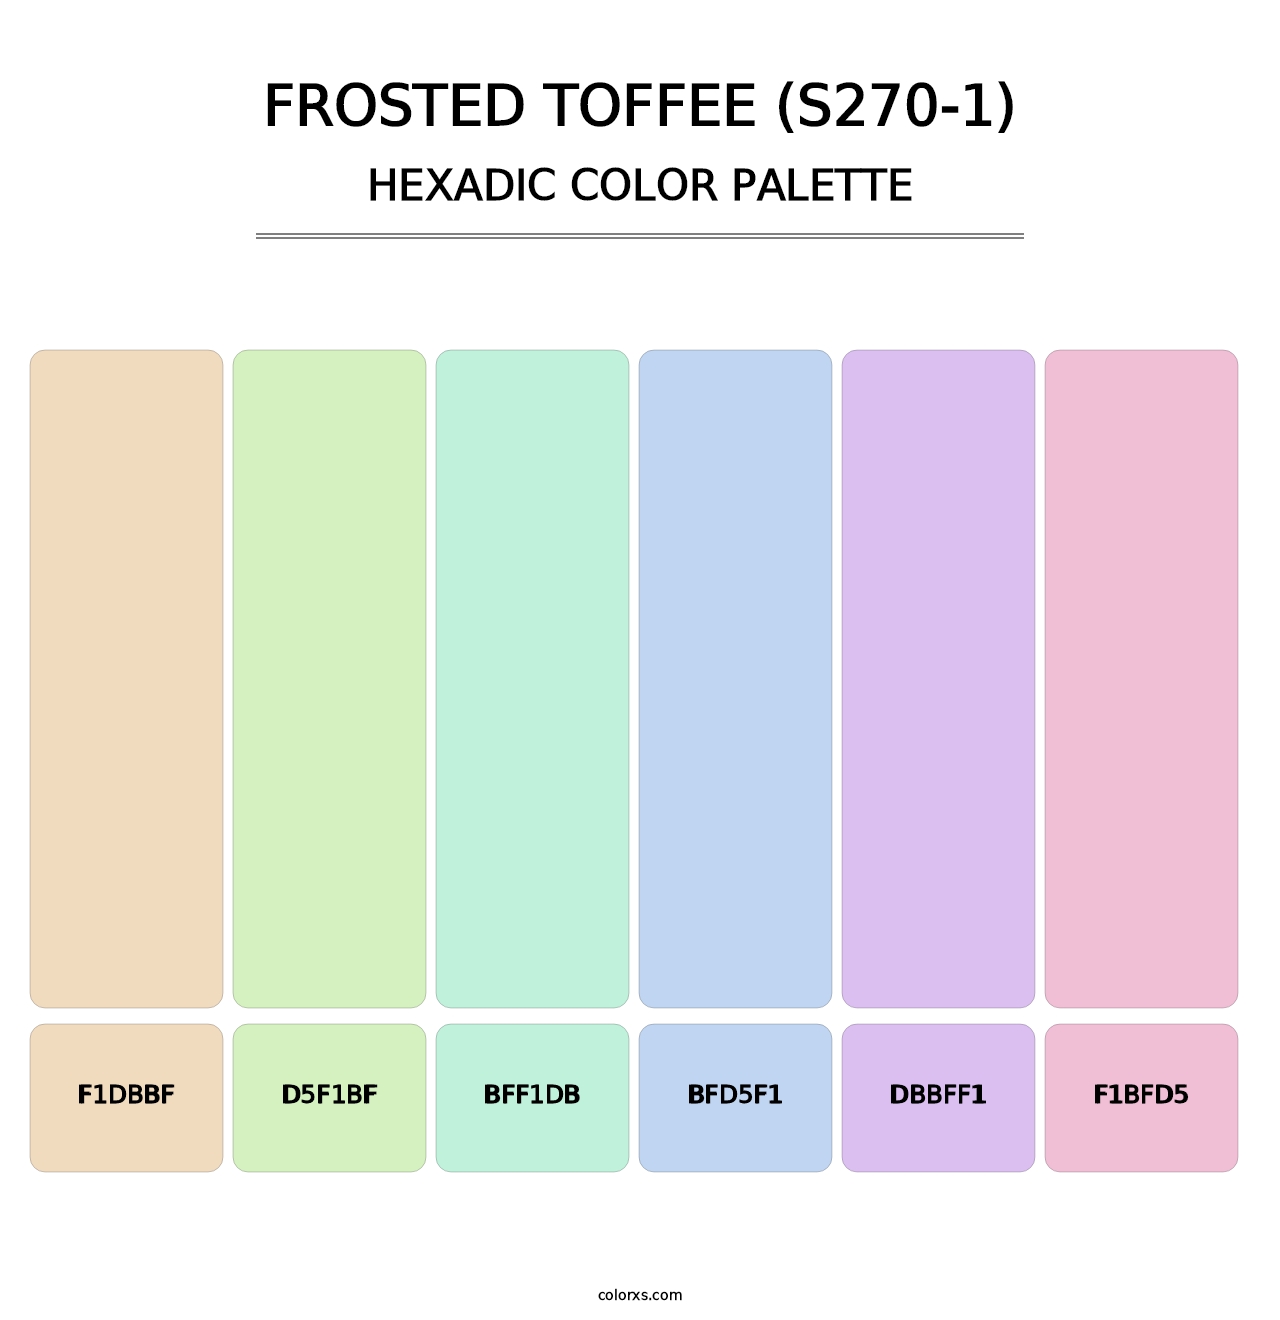 Frosted Toffee (S270-1) - Hexadic Color Palette